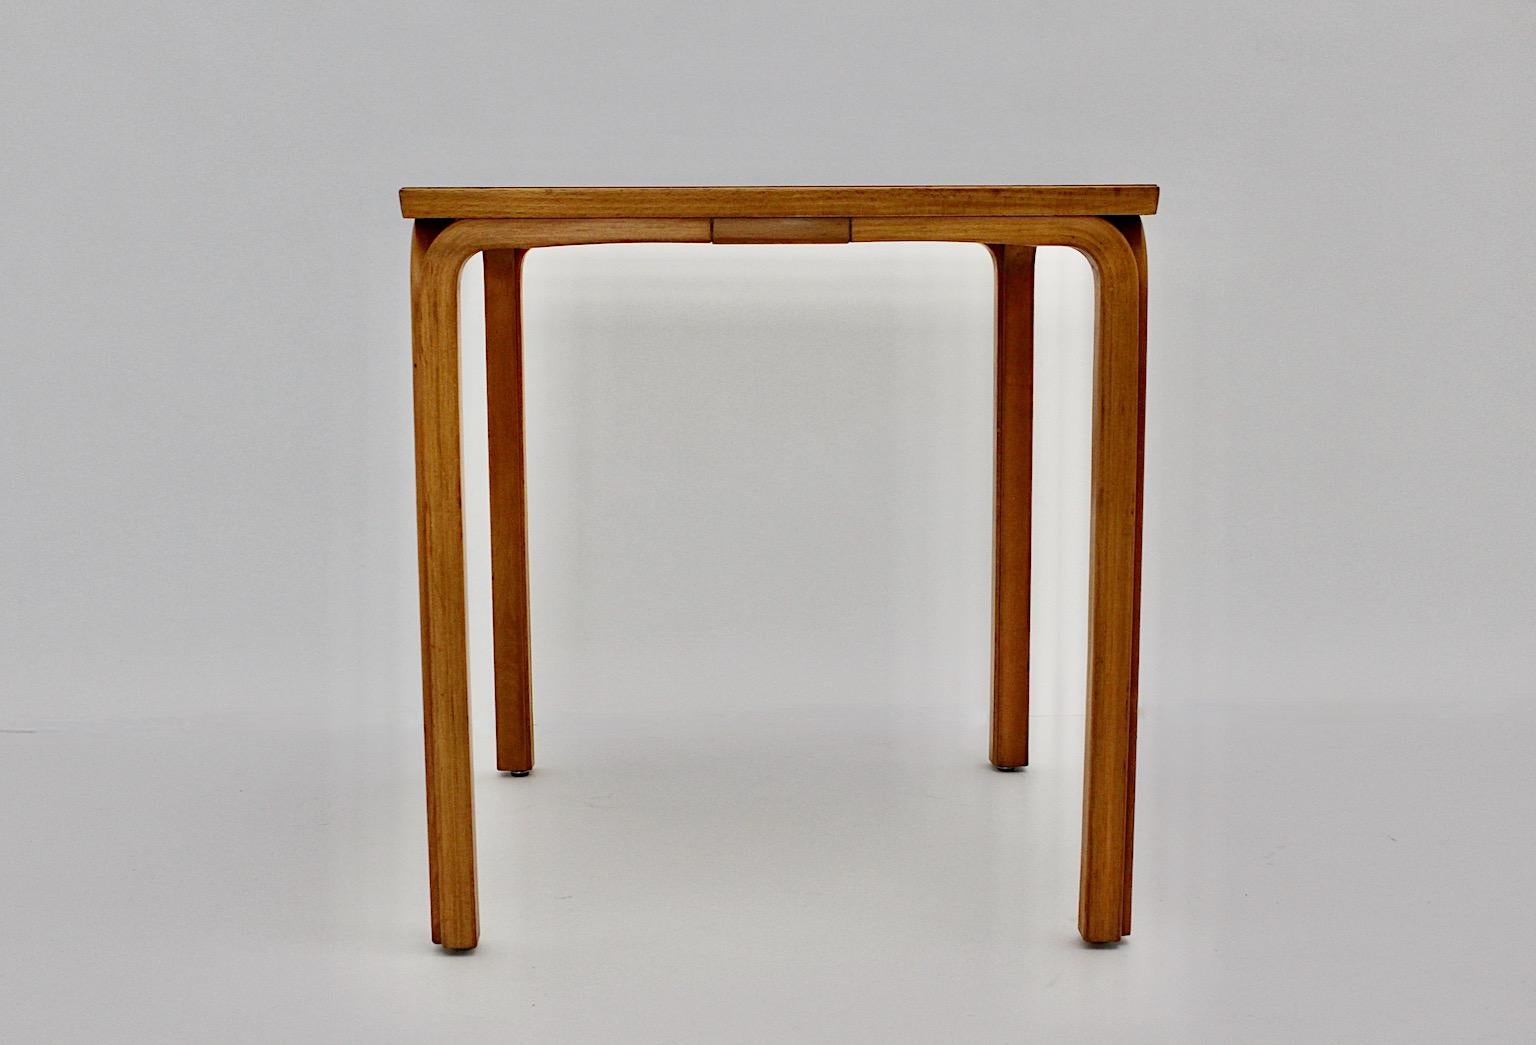 Scandinavian Modern vintage square like form side table from plywood and birch dining table or side table by Alvar Aalto designed circa 1946 Finland manufactured circa 1960.
A wonderful squared dining table or side table from birch while the Y leg